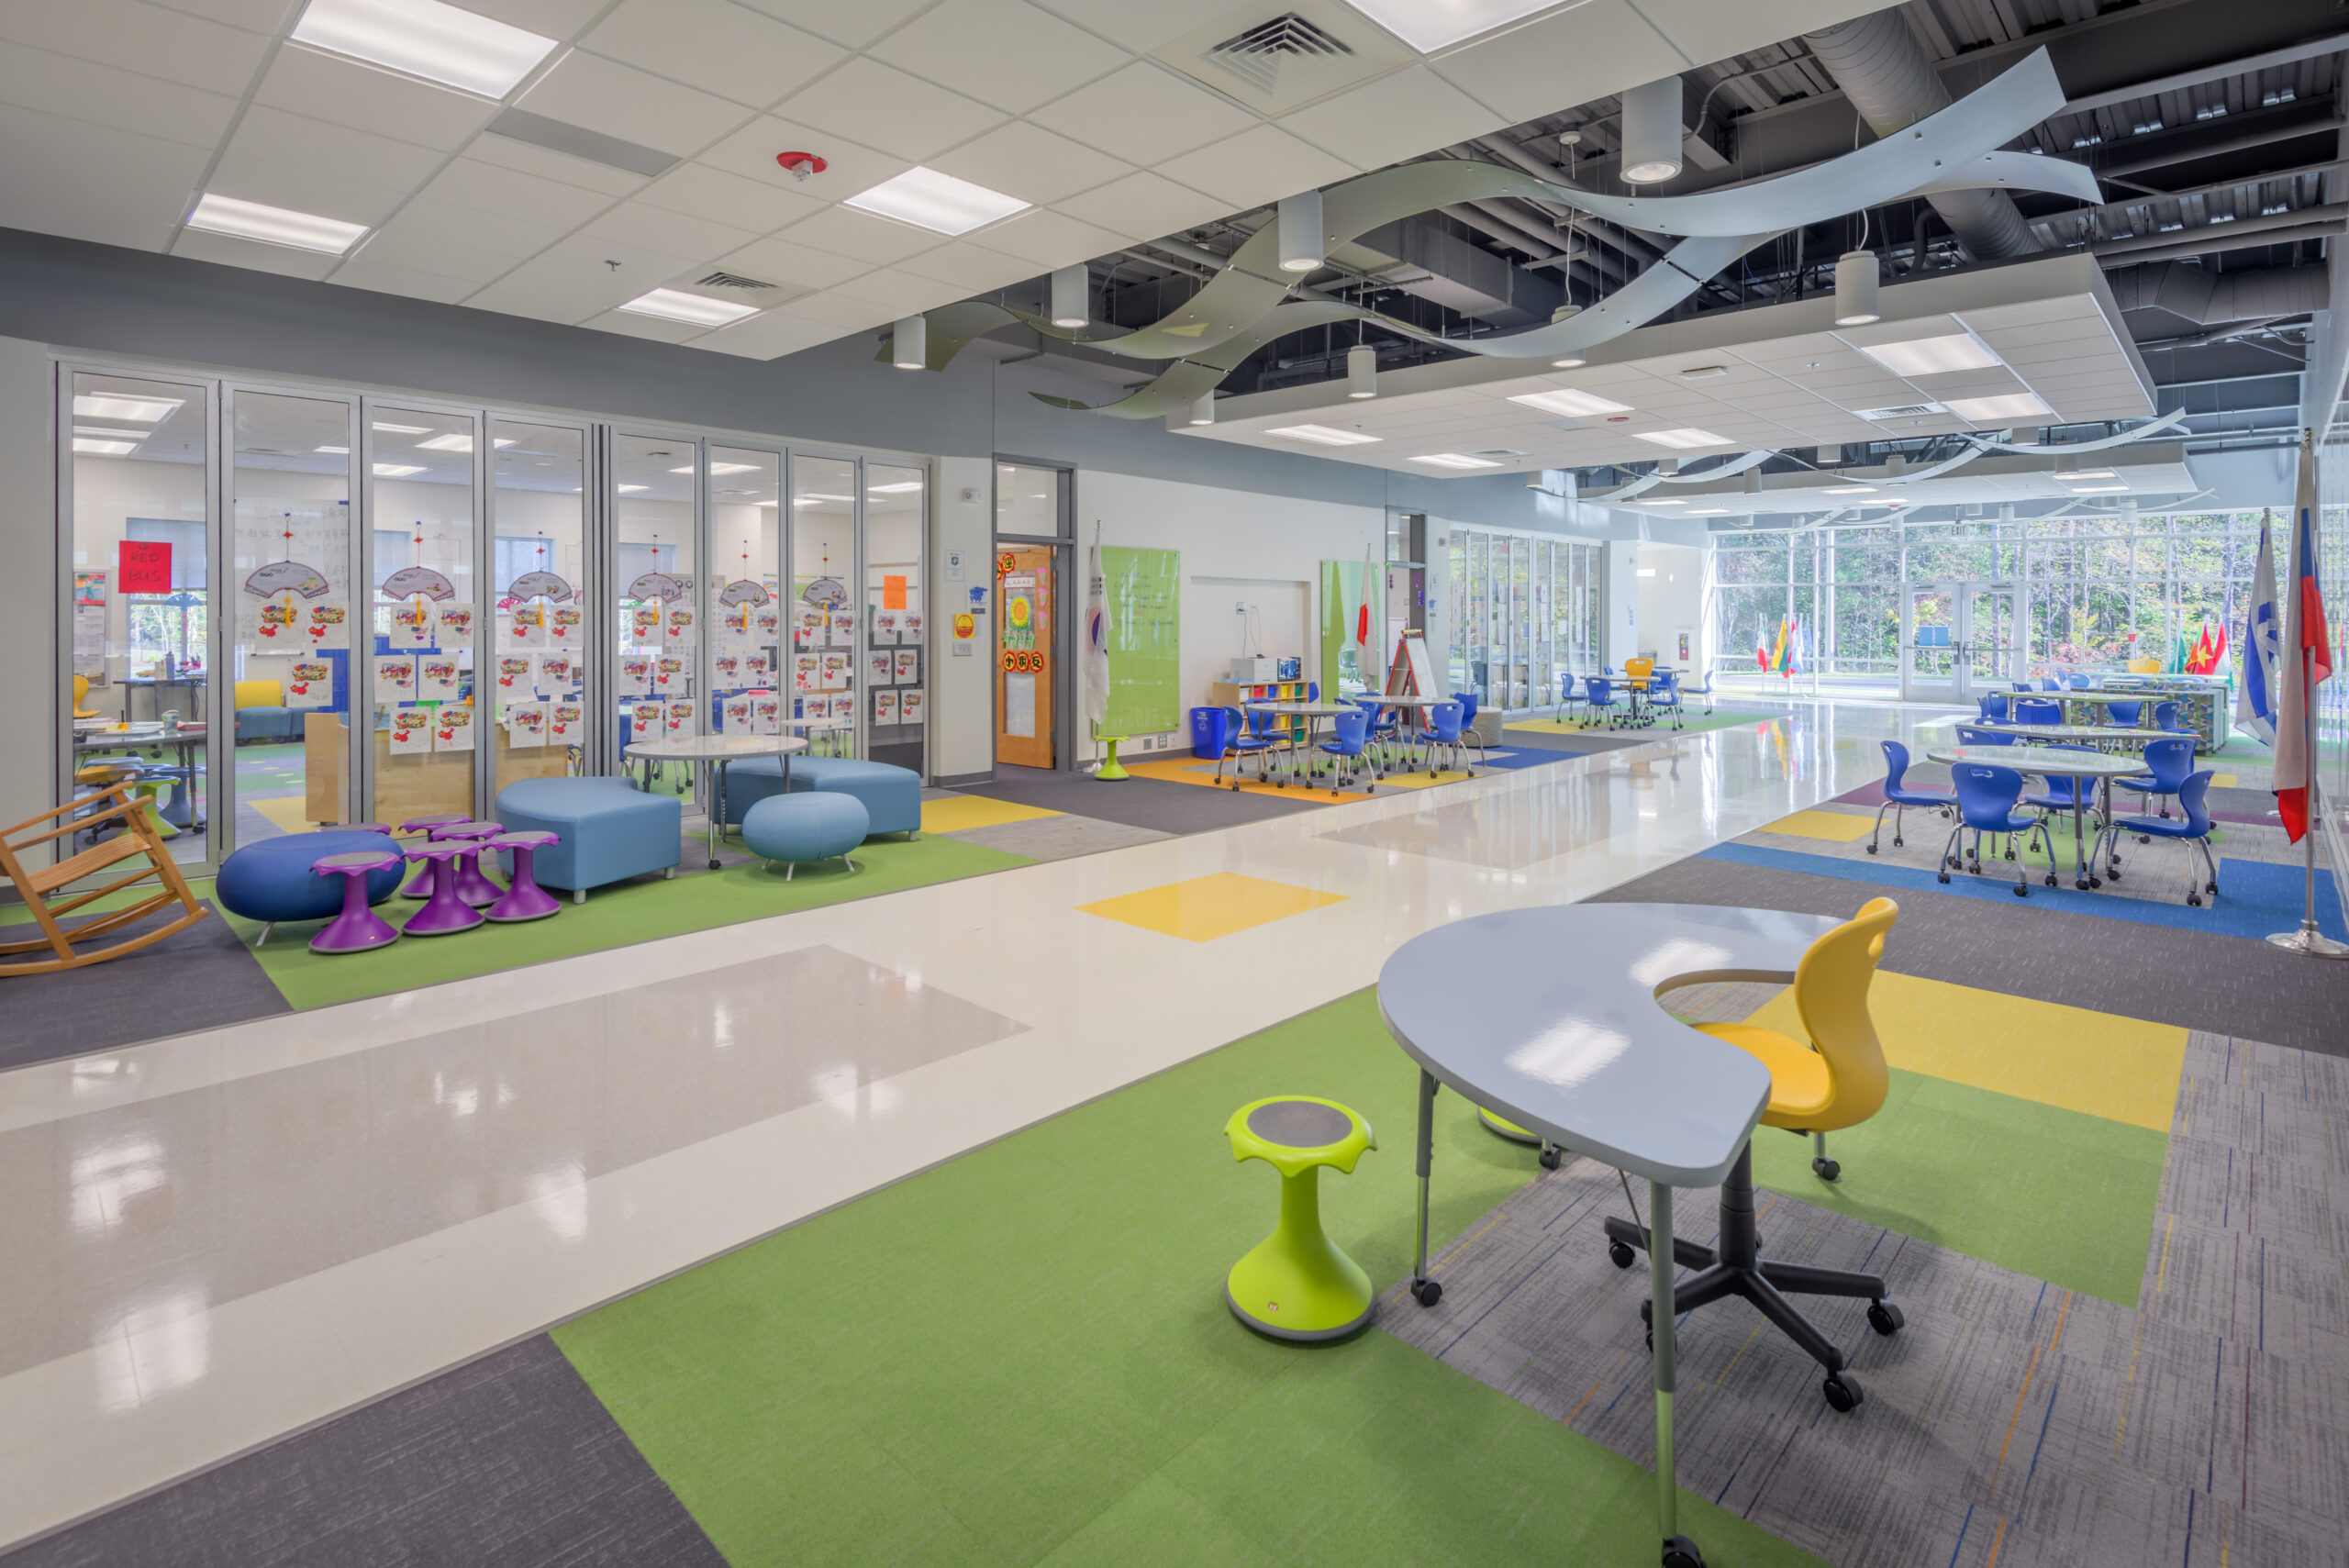 Barton Pond Elementary School Flex Space with Tables, Chairs, Ottomans, and Gathering Areas